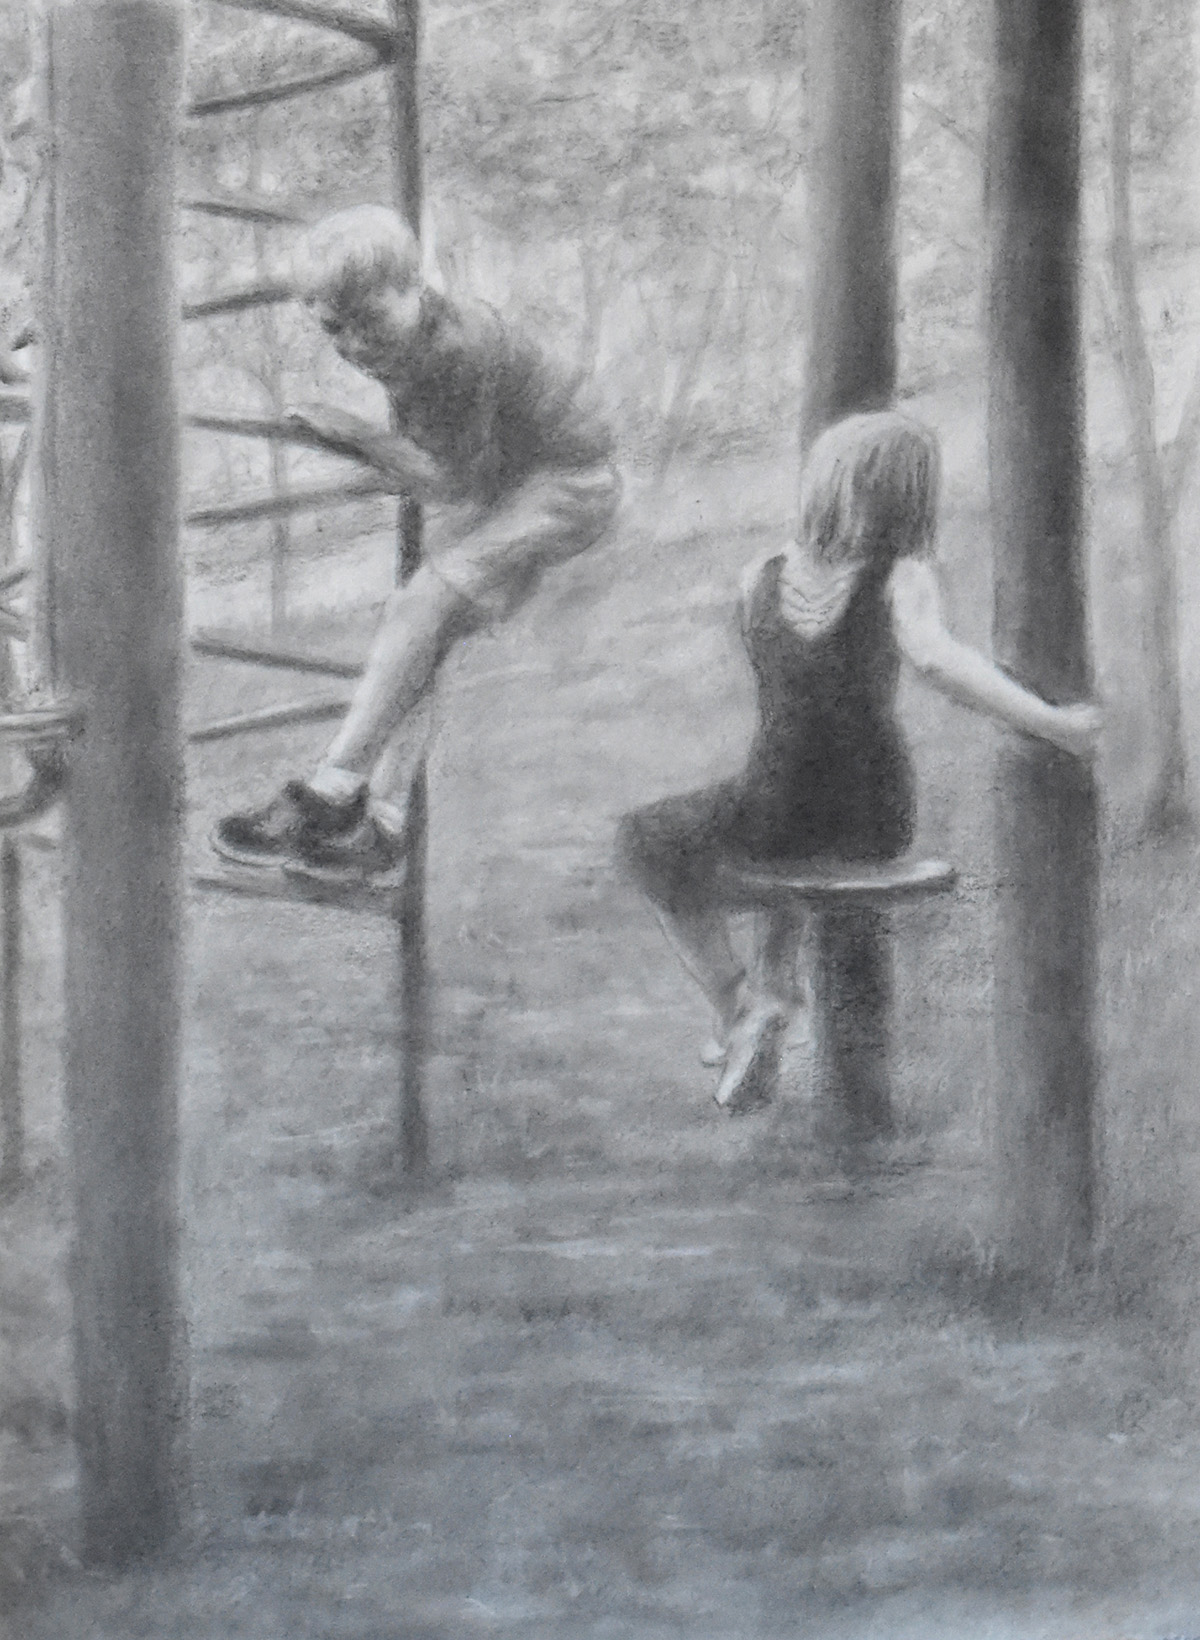 graphite drawing of two children playing at a playground